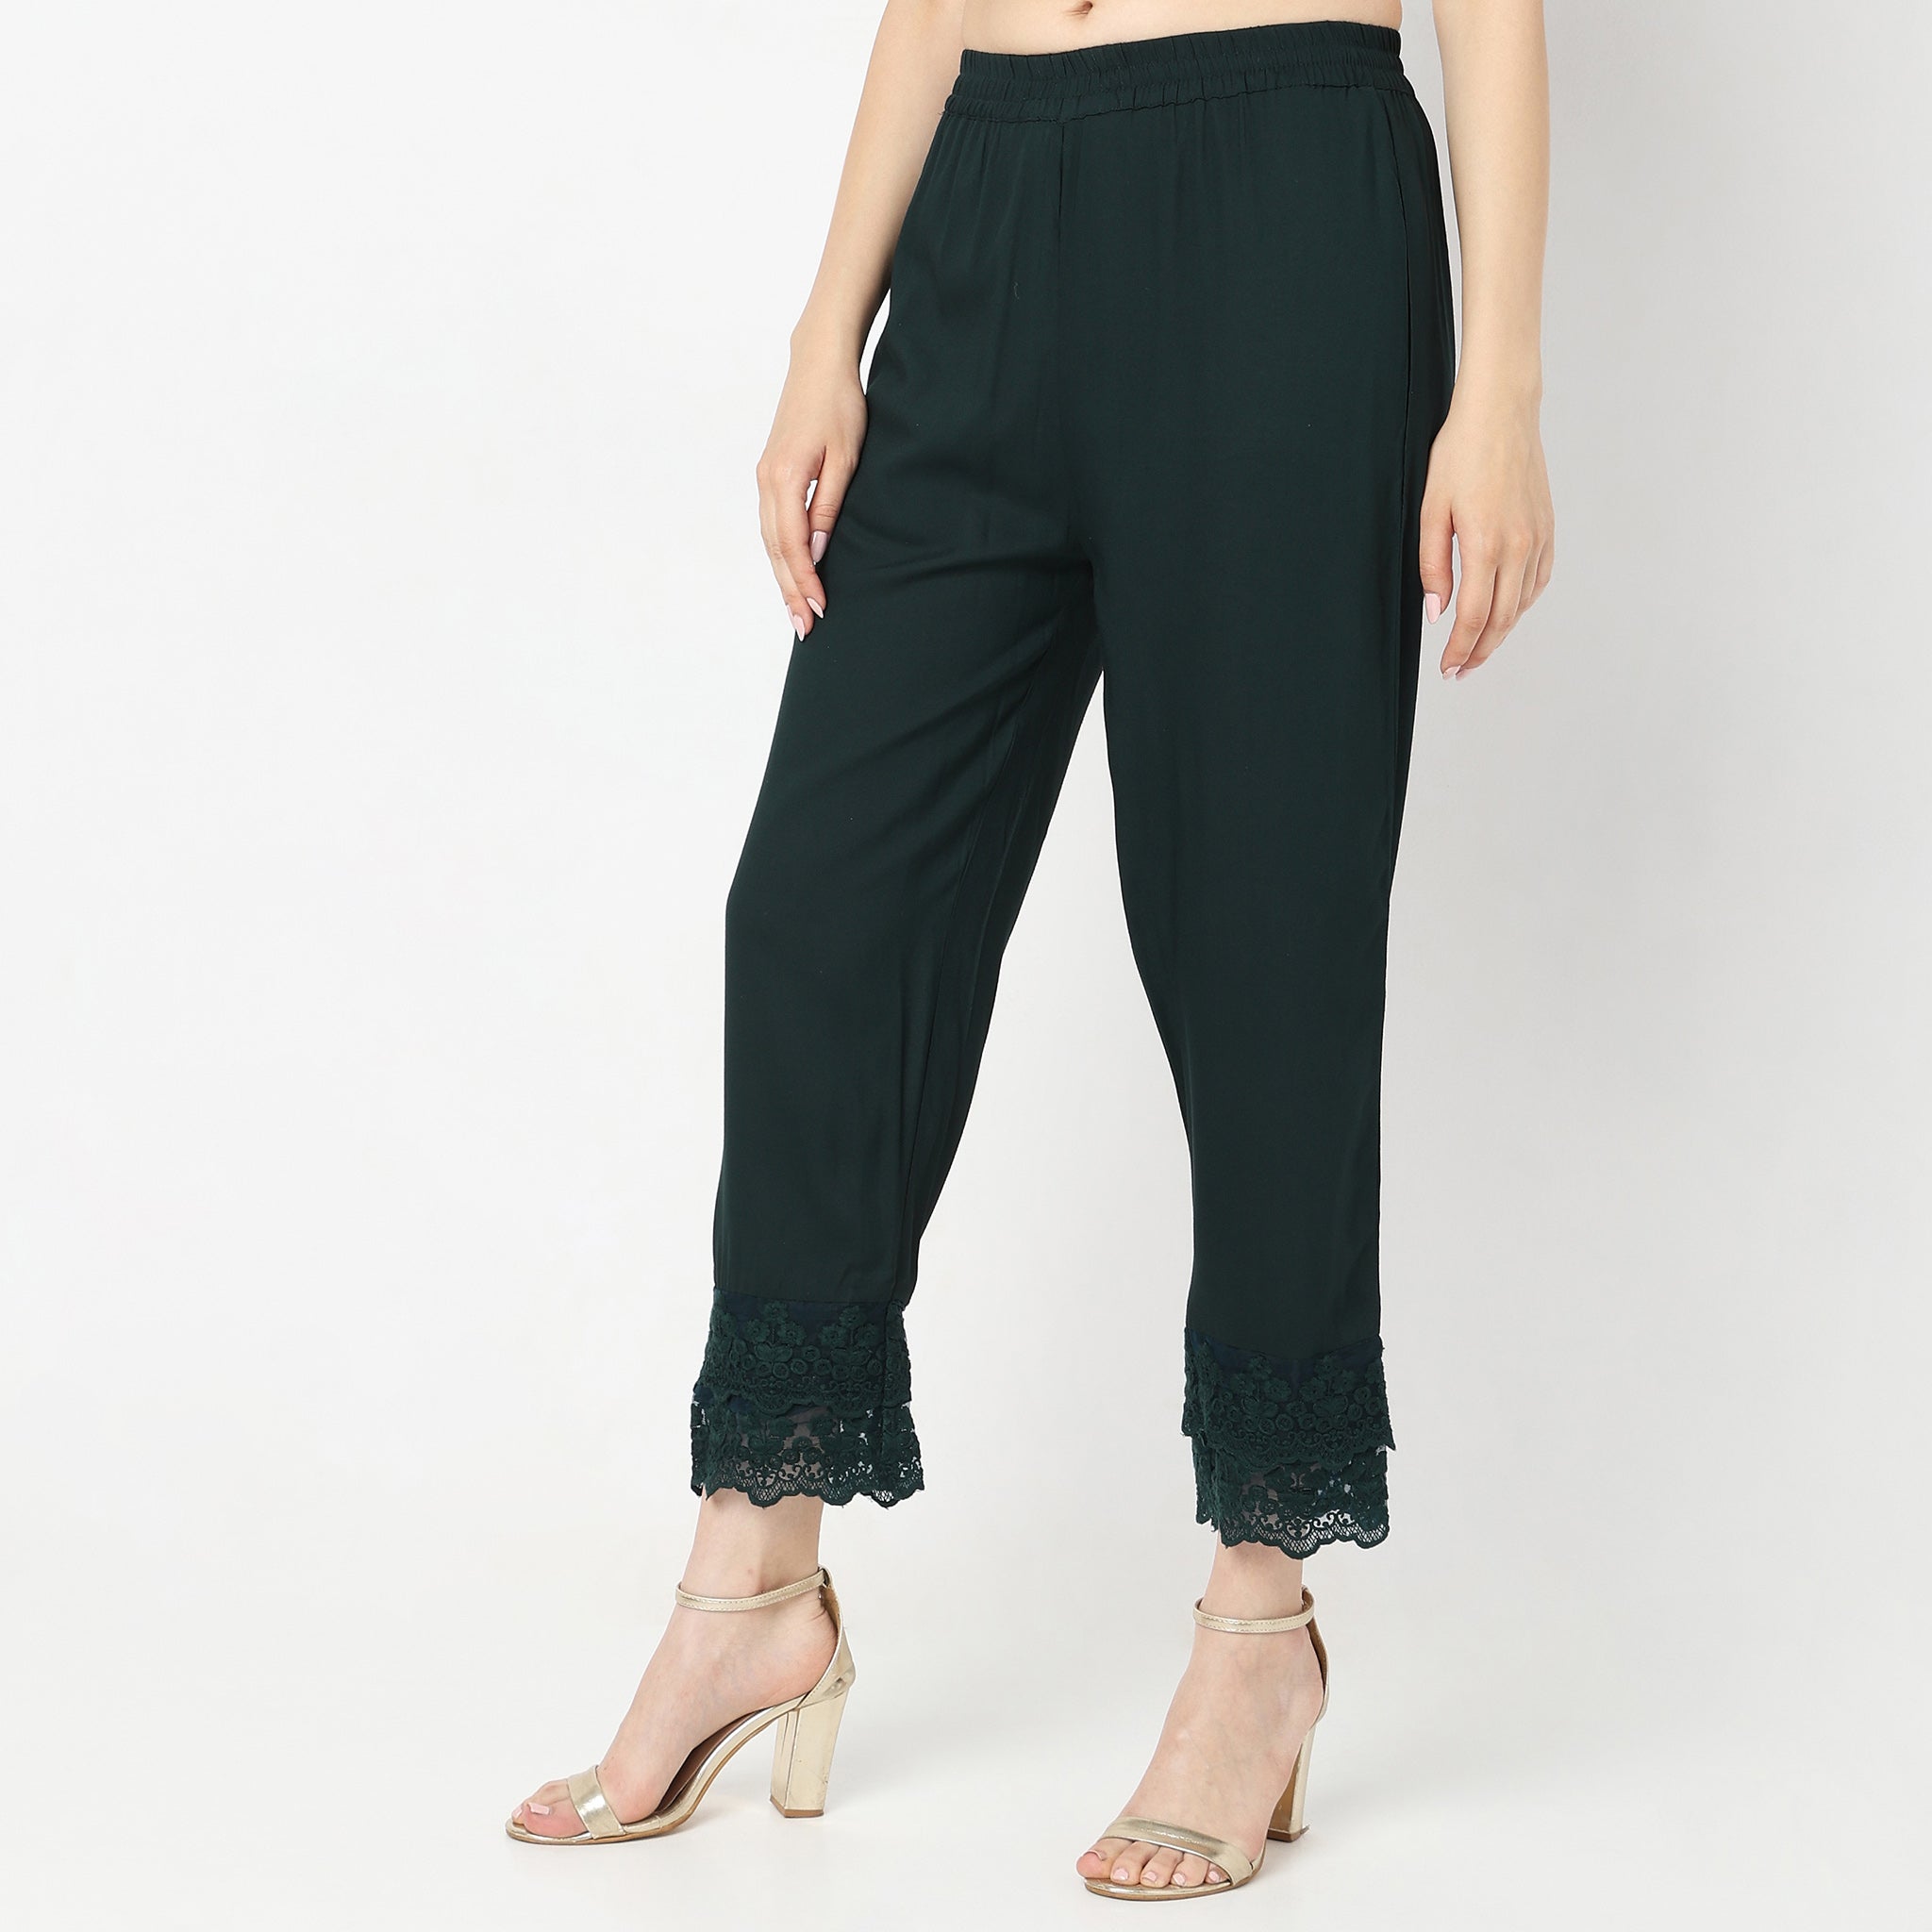 Straight Fit Solid Mid Rise Ethnic Pants